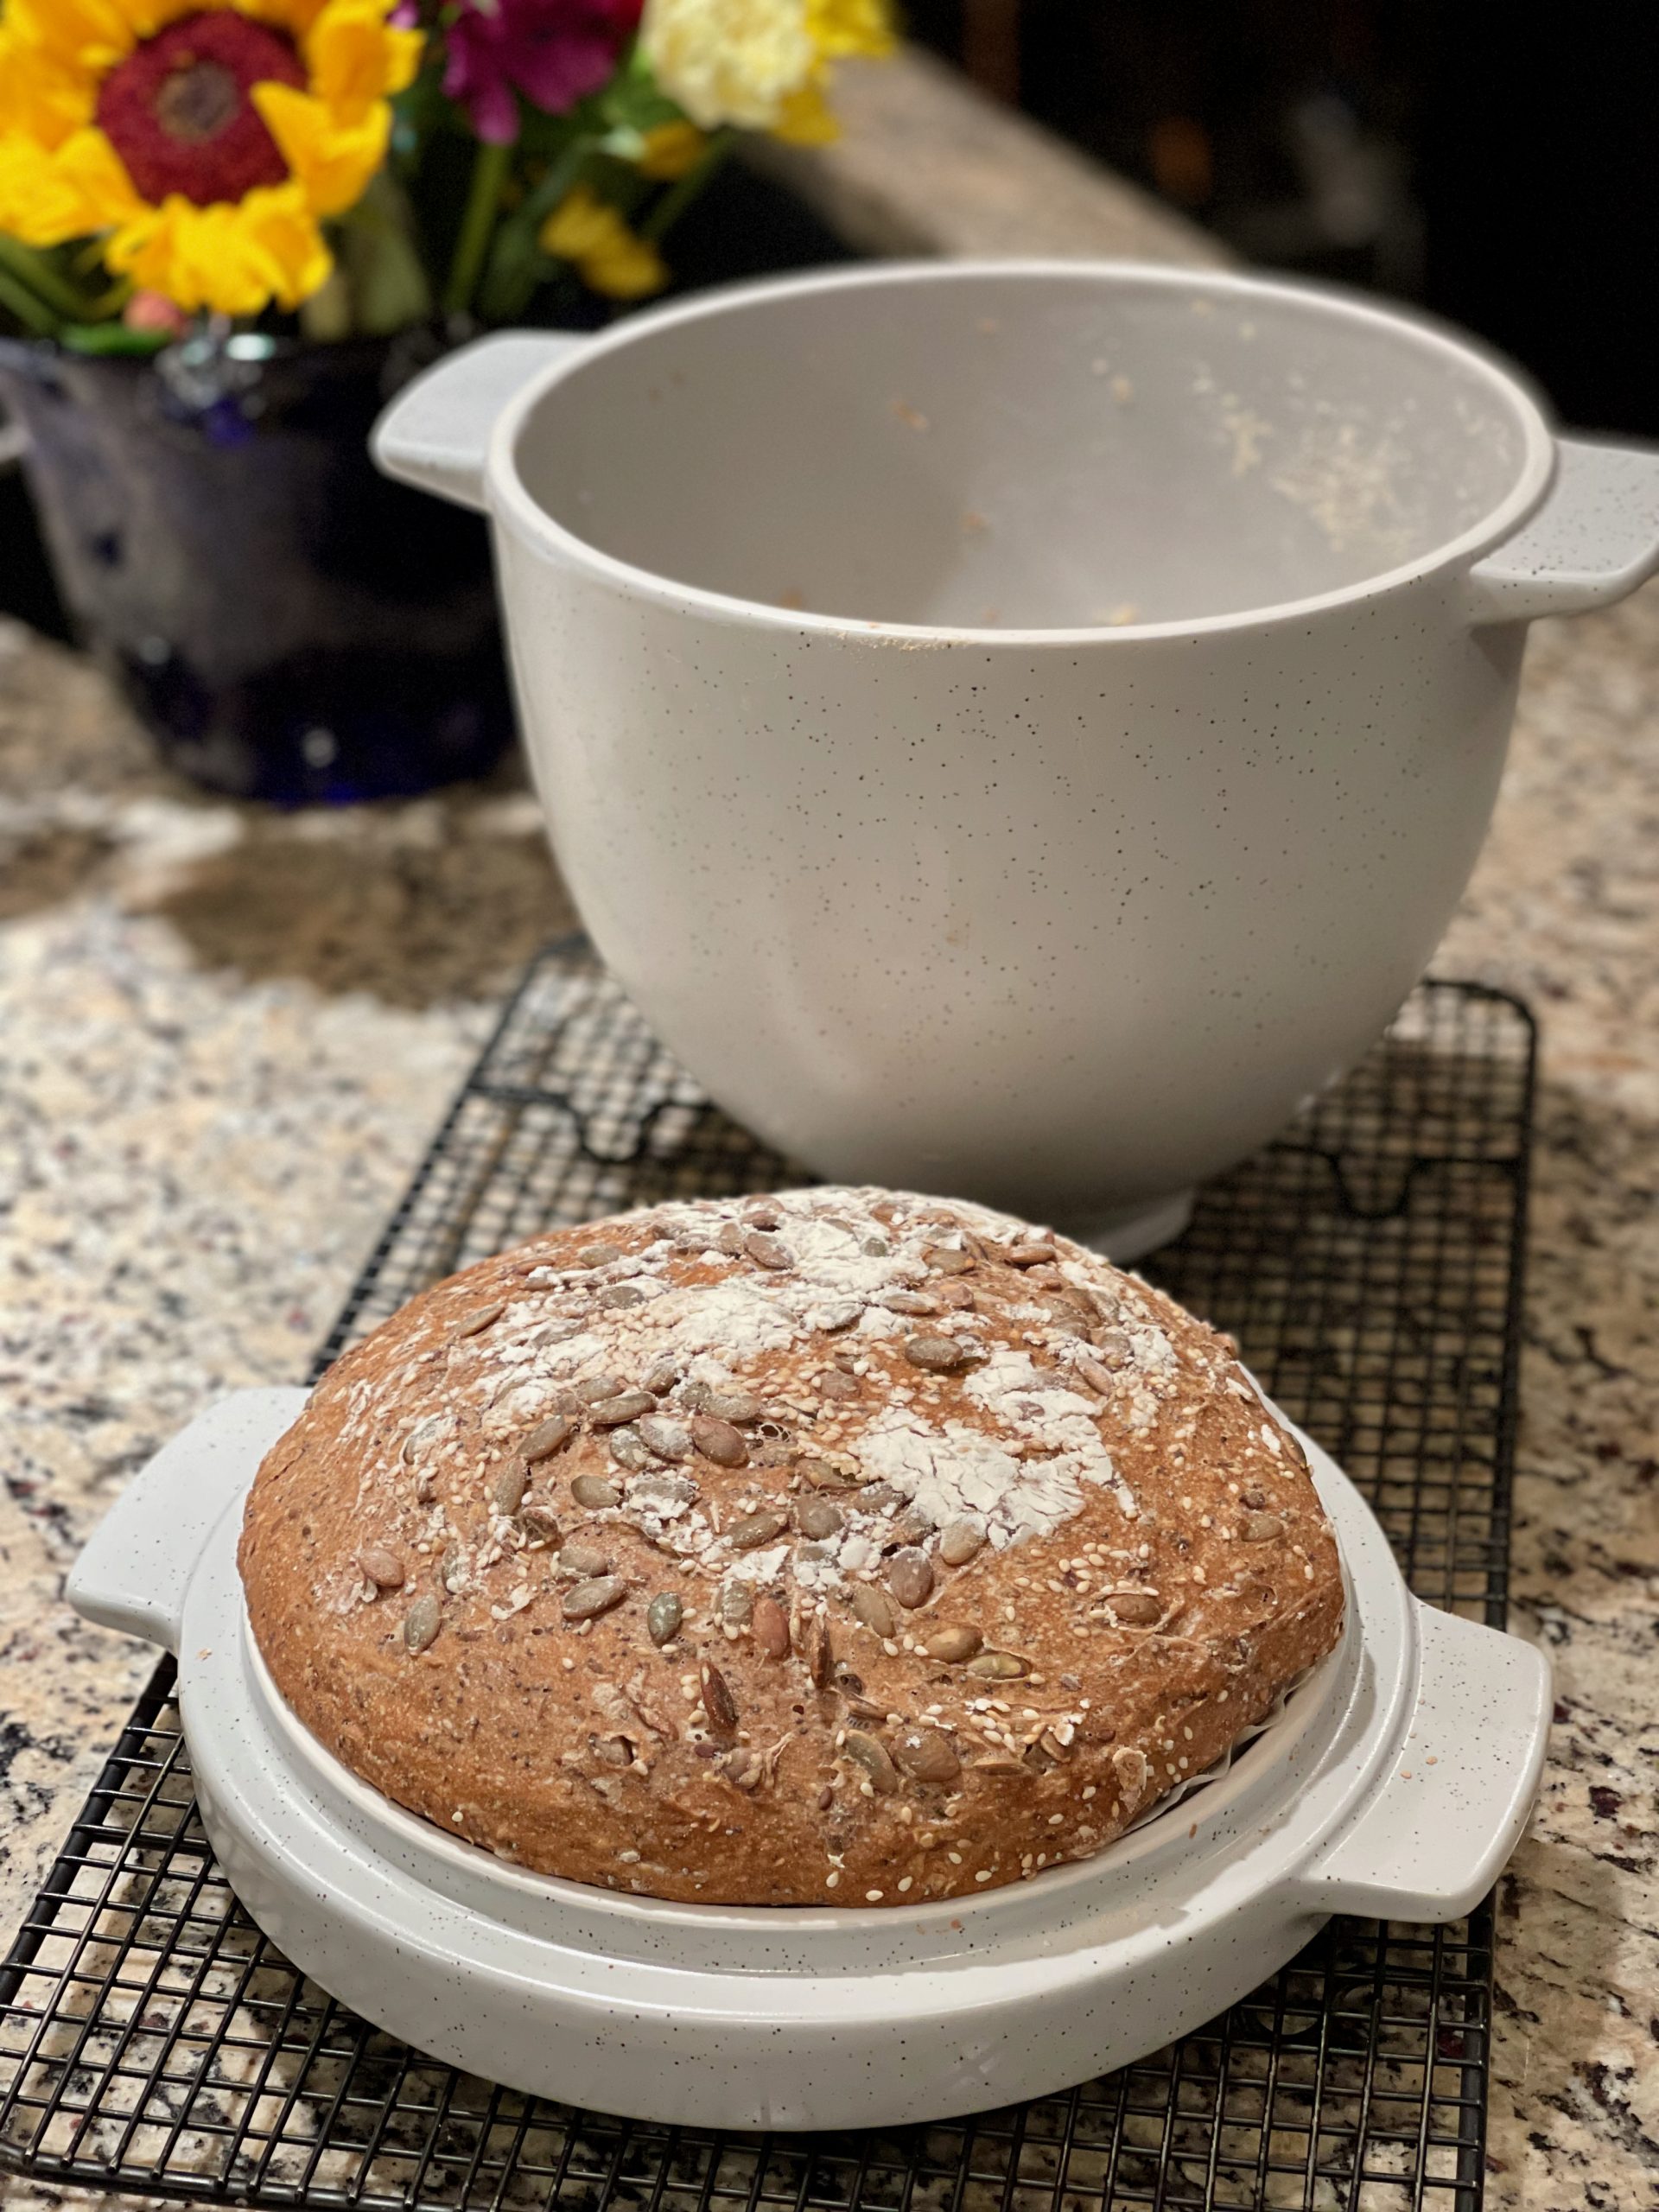 https://www.epicuricloud.com/wp-content/uploads/2021/12/KitchenAid-Bread-Bowl-Whole-Wheat-Seed-Bread-scaled.jpeg